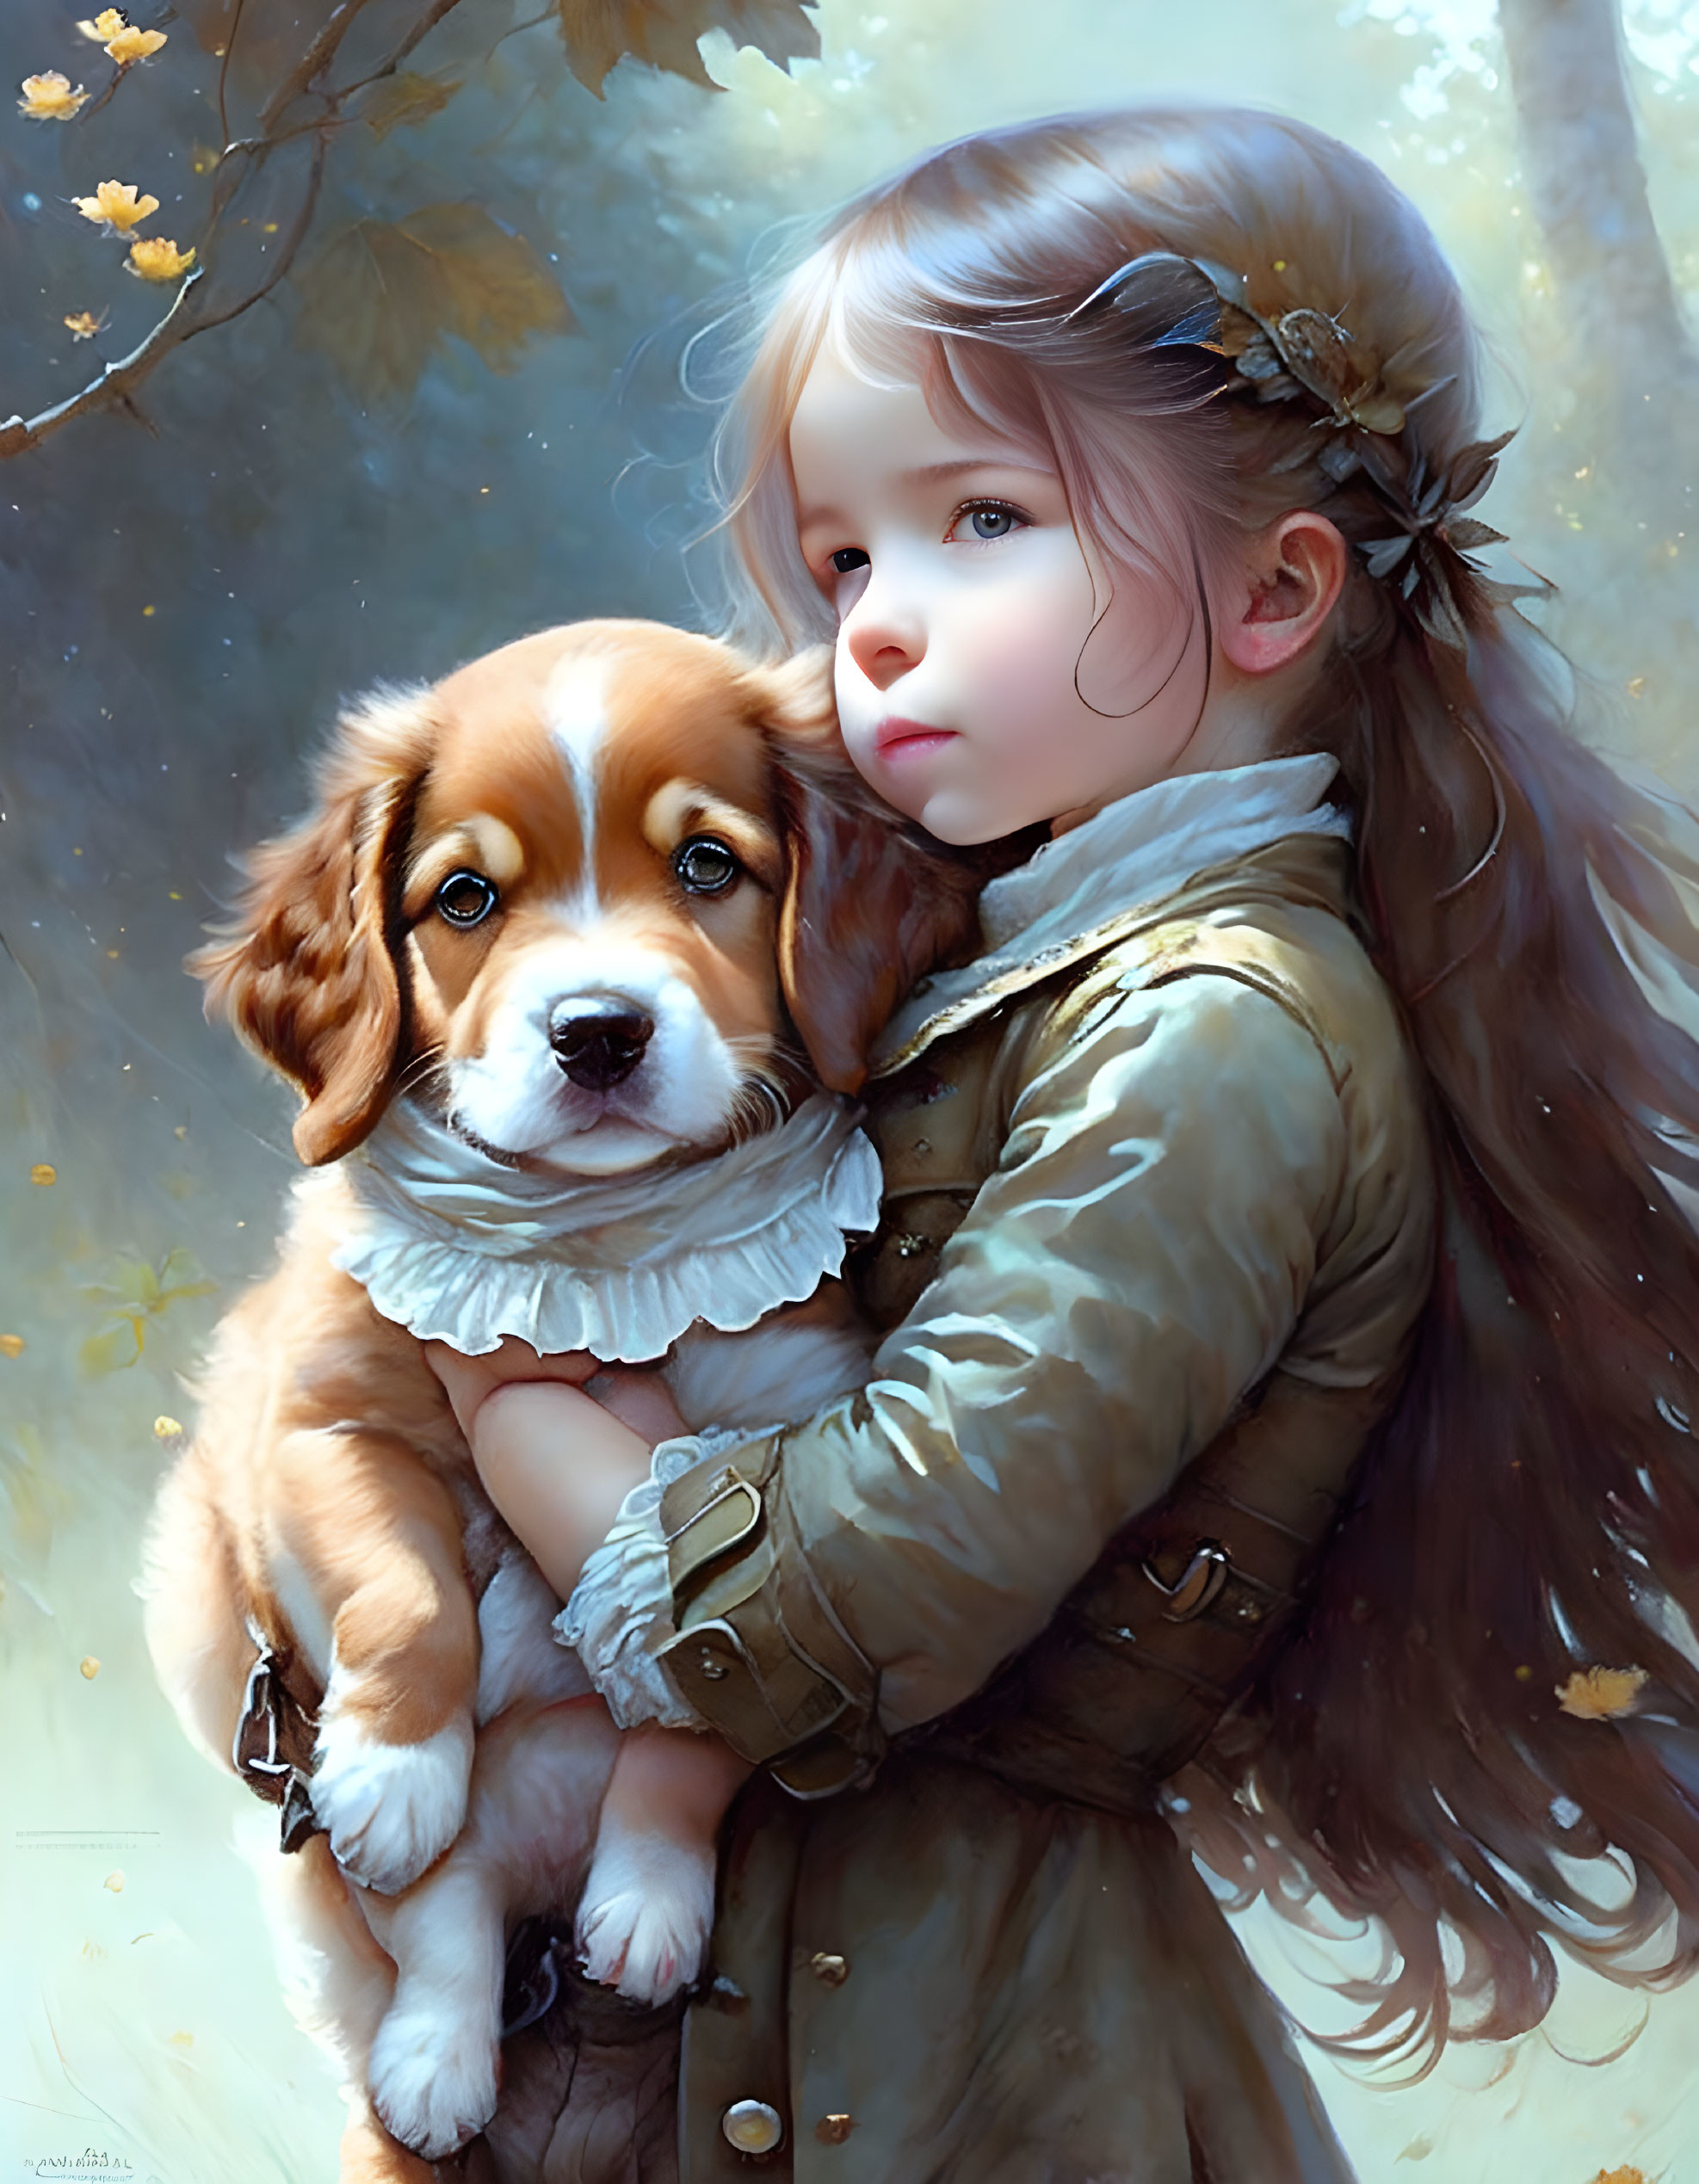 Young girl with long hair holding brown and white puppy against soft background